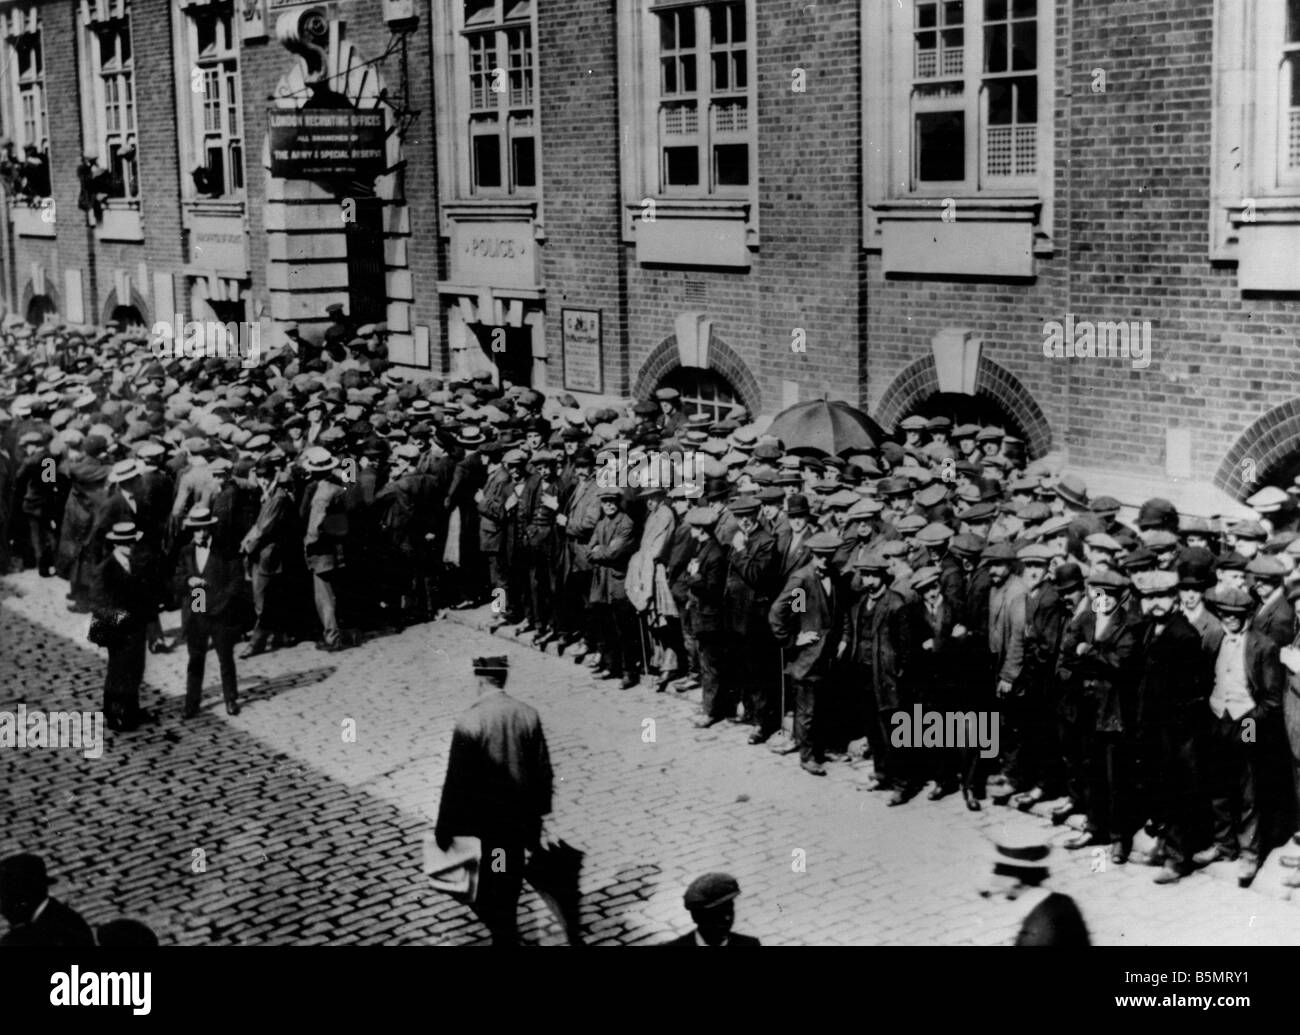 9EN 1914 8 4 A1 1 E Mobilization in London 1914 Photo World War I Great Britain Entry into the War on 4 August 1914 after the Ge Stock Photo